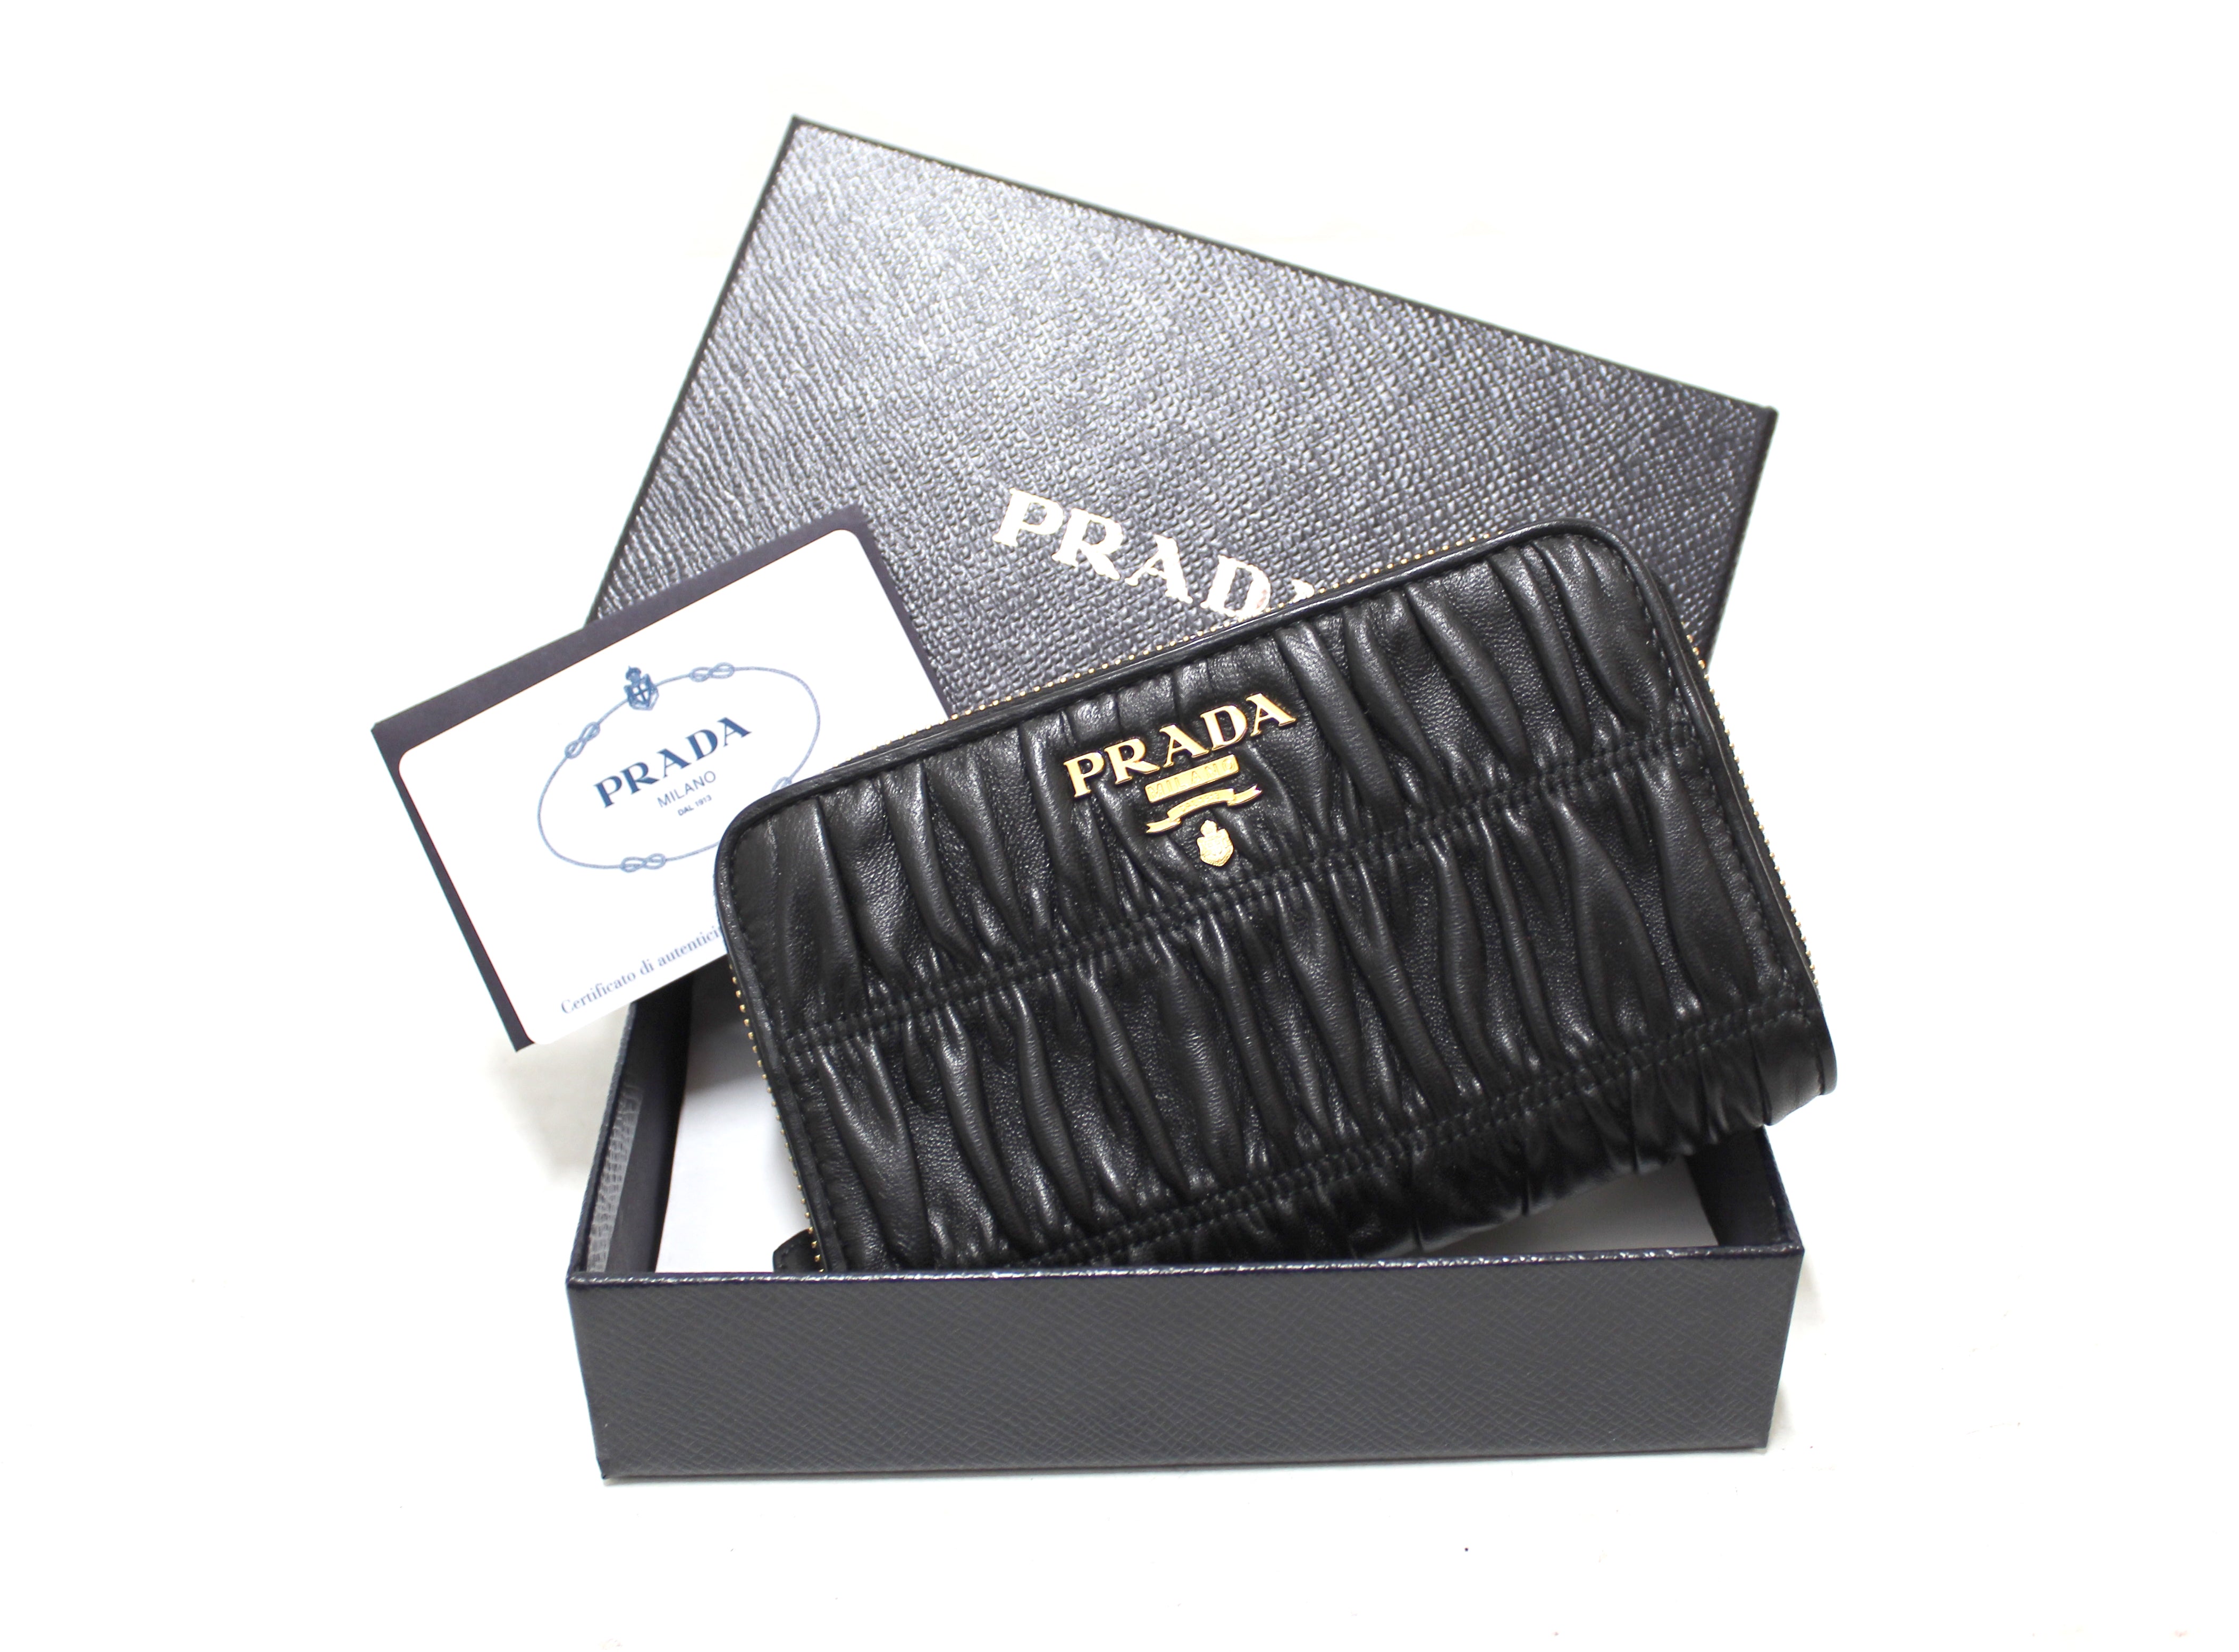 Authentic New Prada Black Nappa Gaufre Leather Small Zipper Wallet